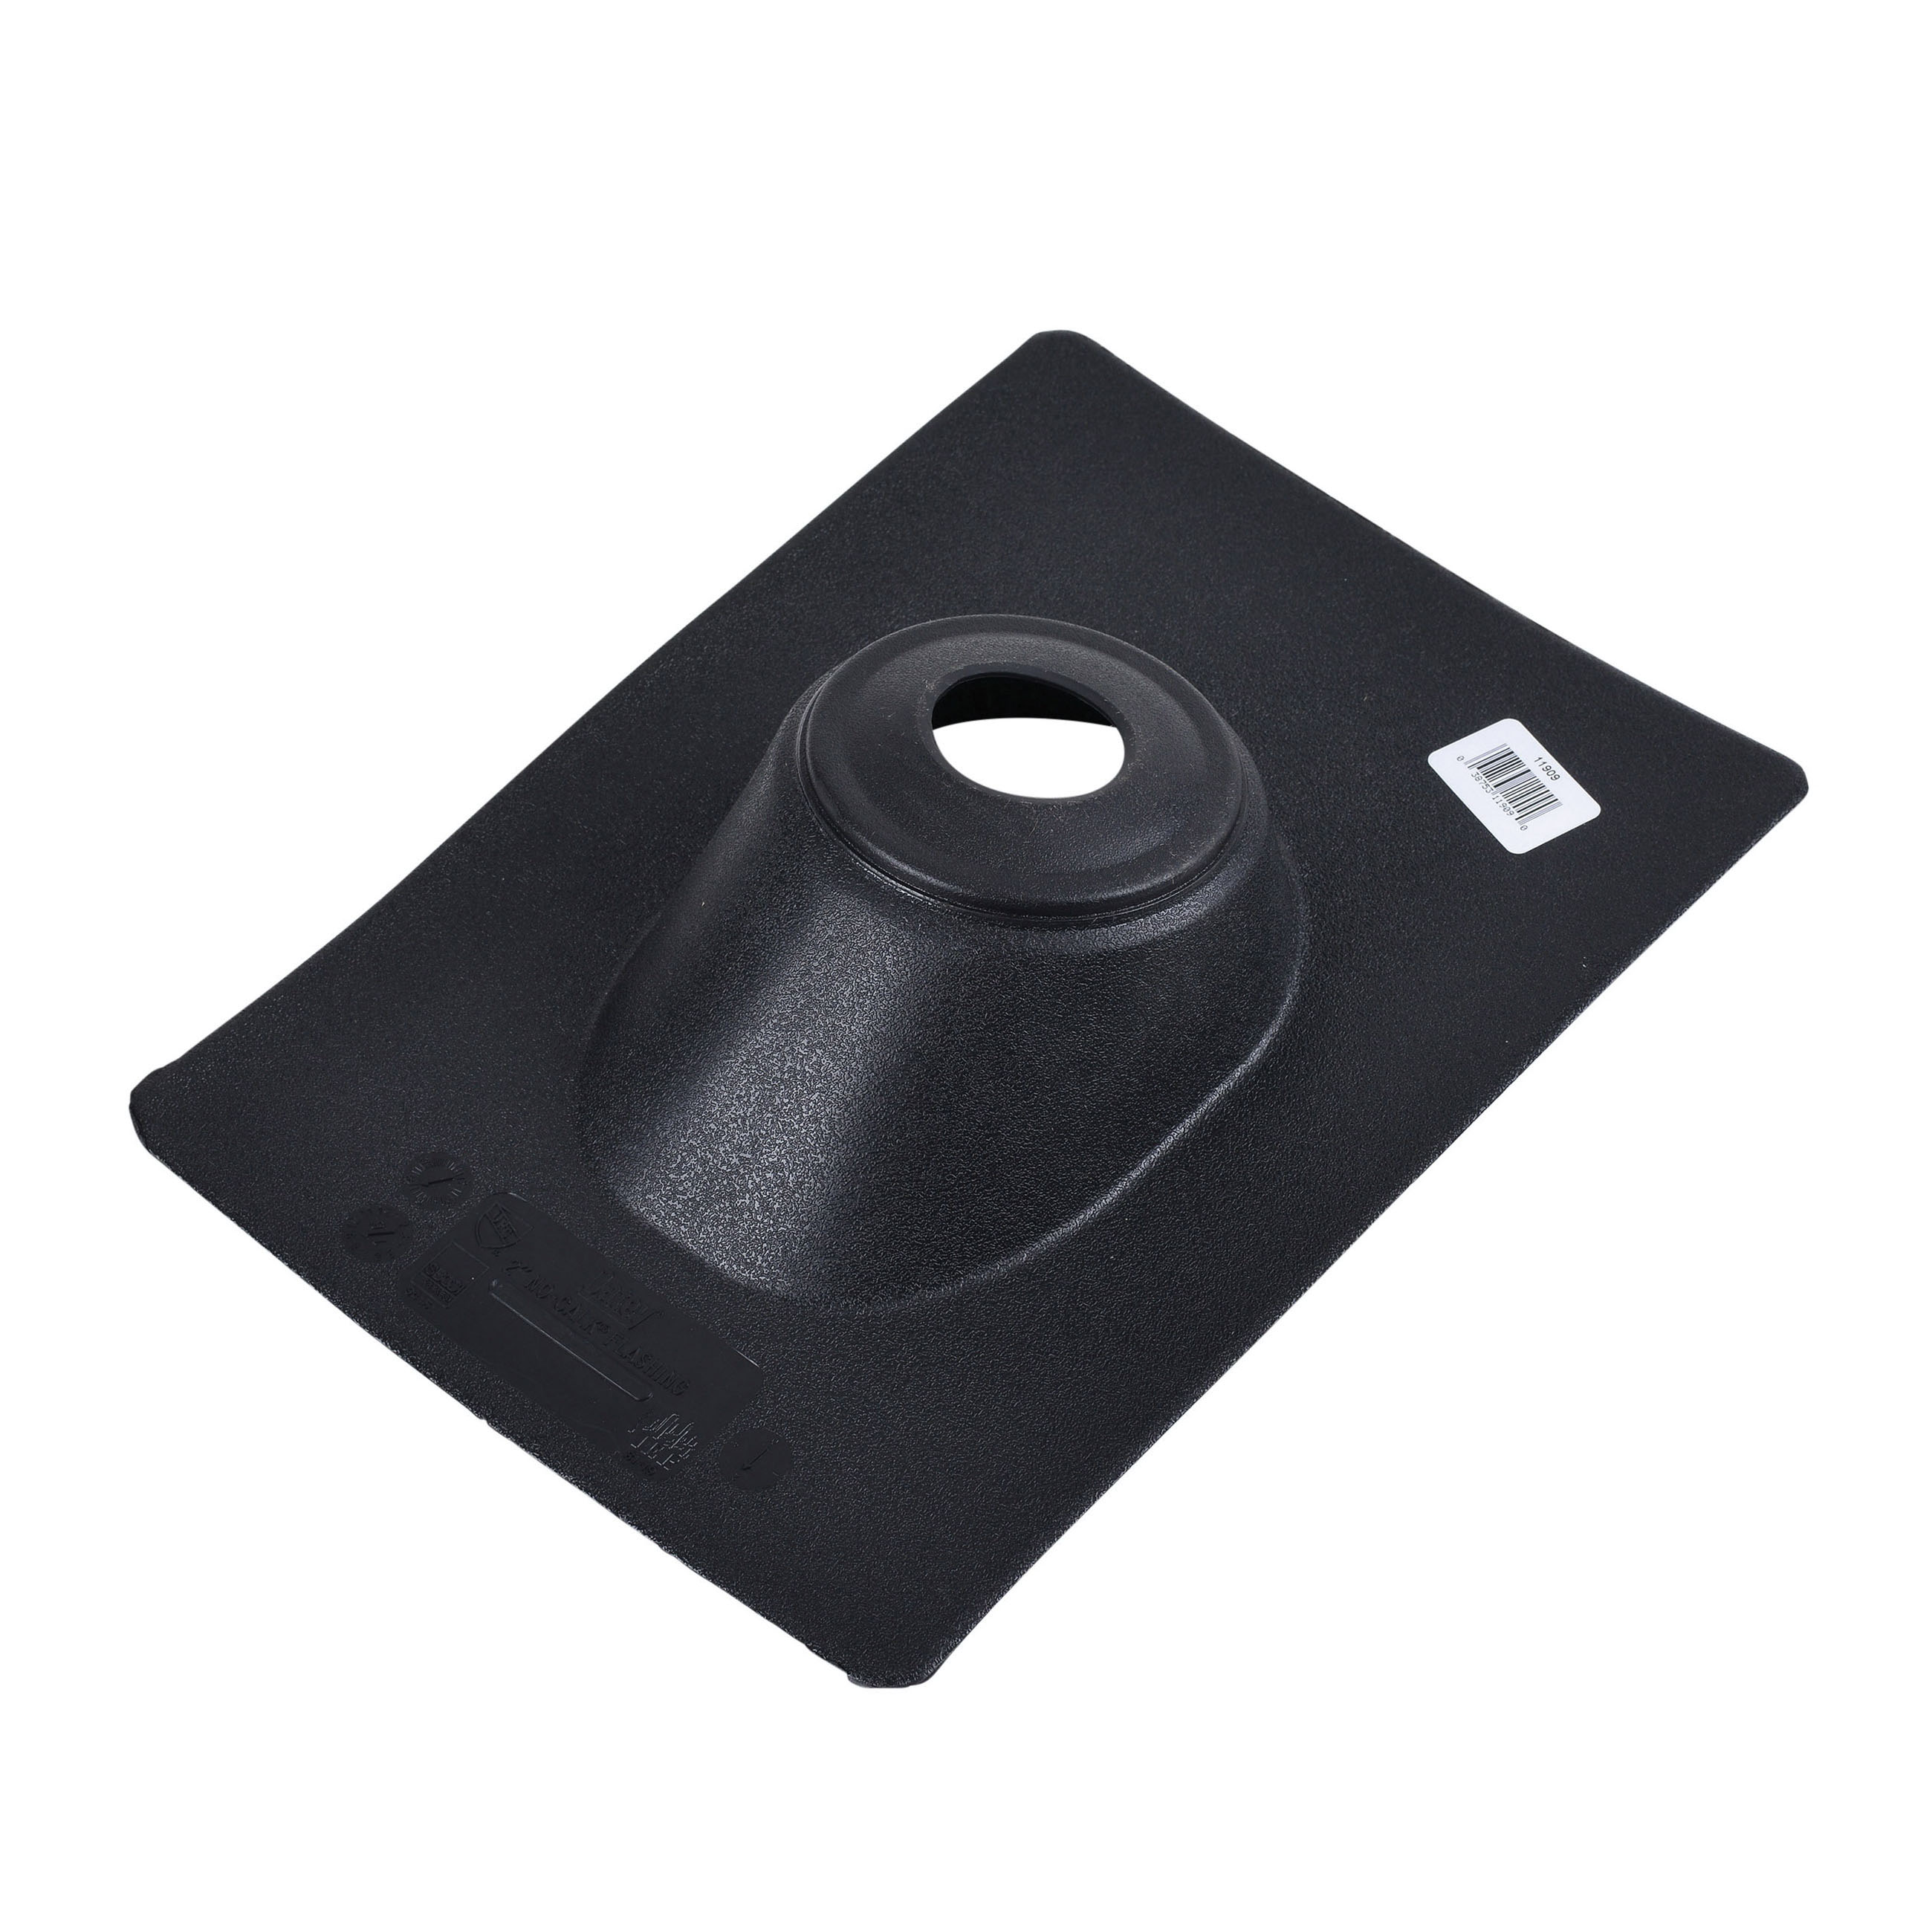 Oatey® No-Calk® 11910 Roof Flashing, 15 in L Base, 11 in W Base, Thermoplastic Base, Fits Vent Pipe Size: 3 in